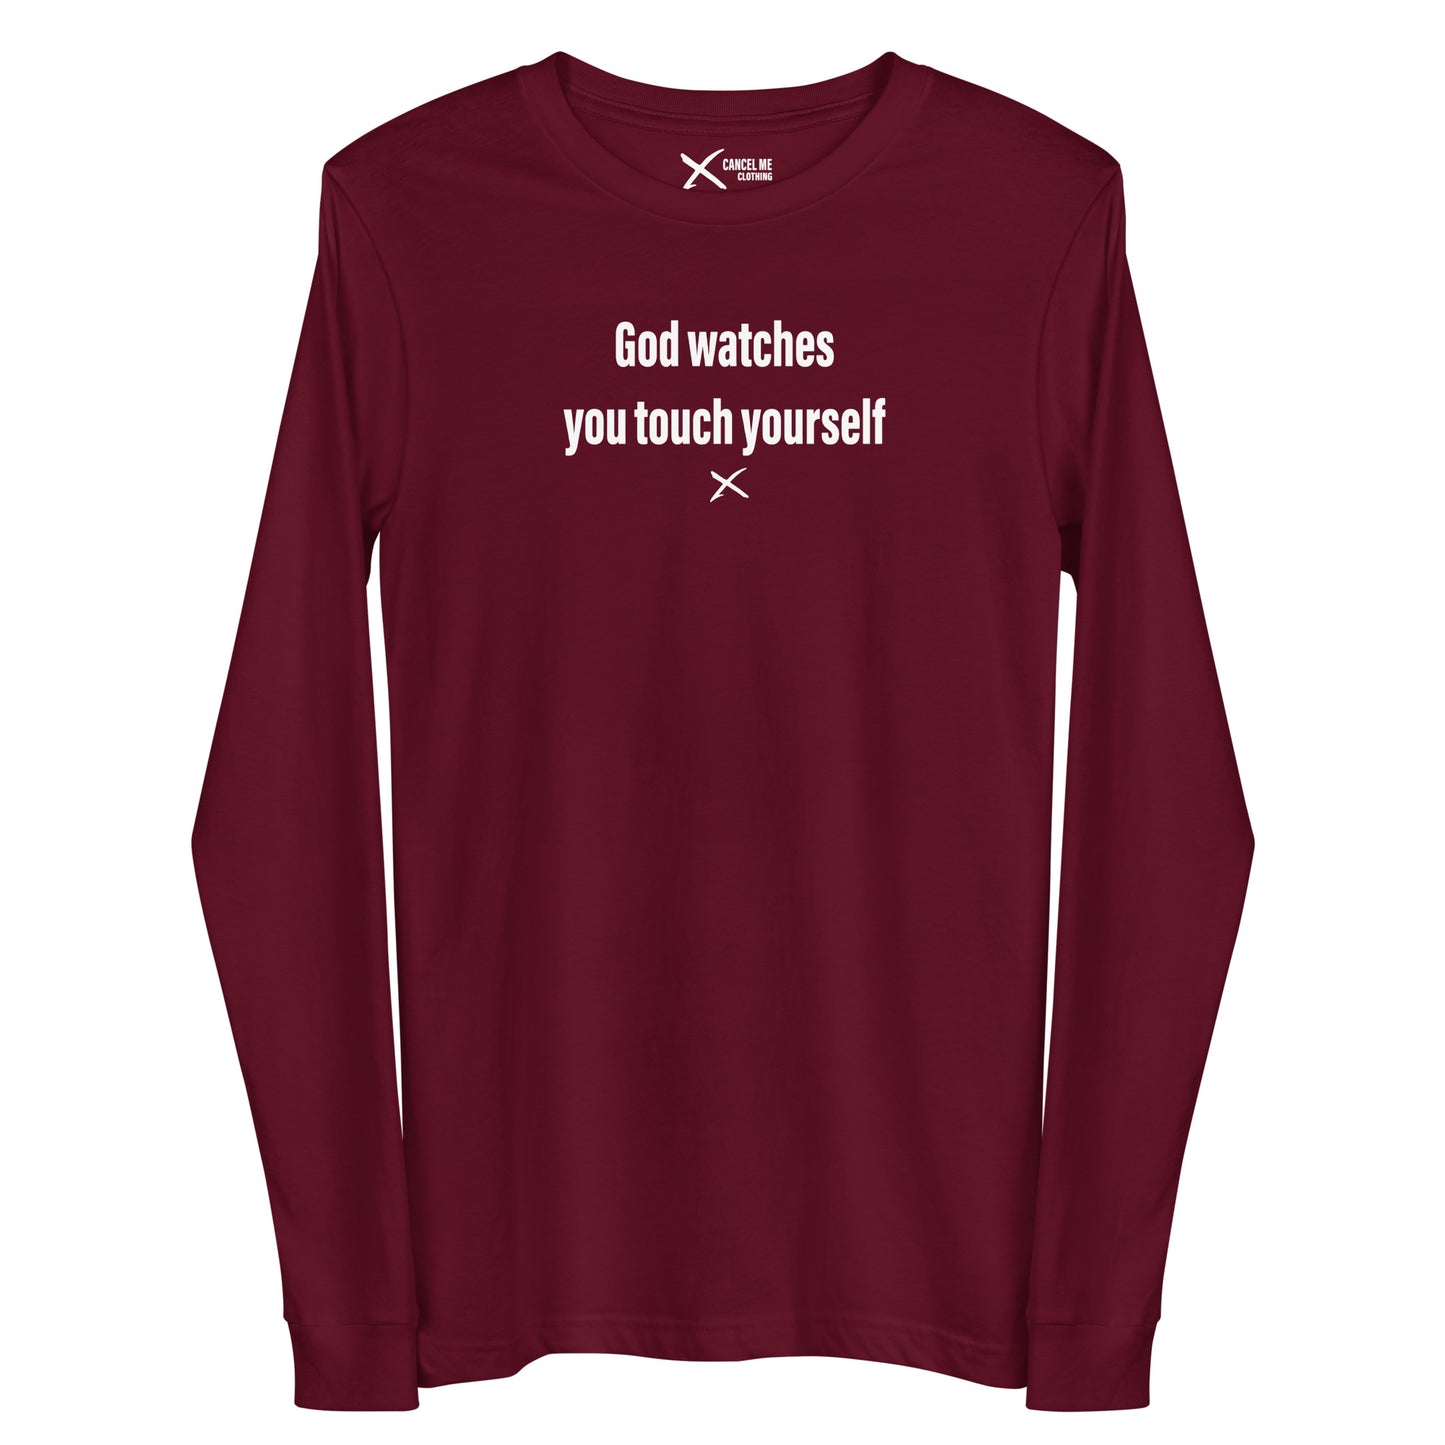 God watches you touch yourself - Longsleeve